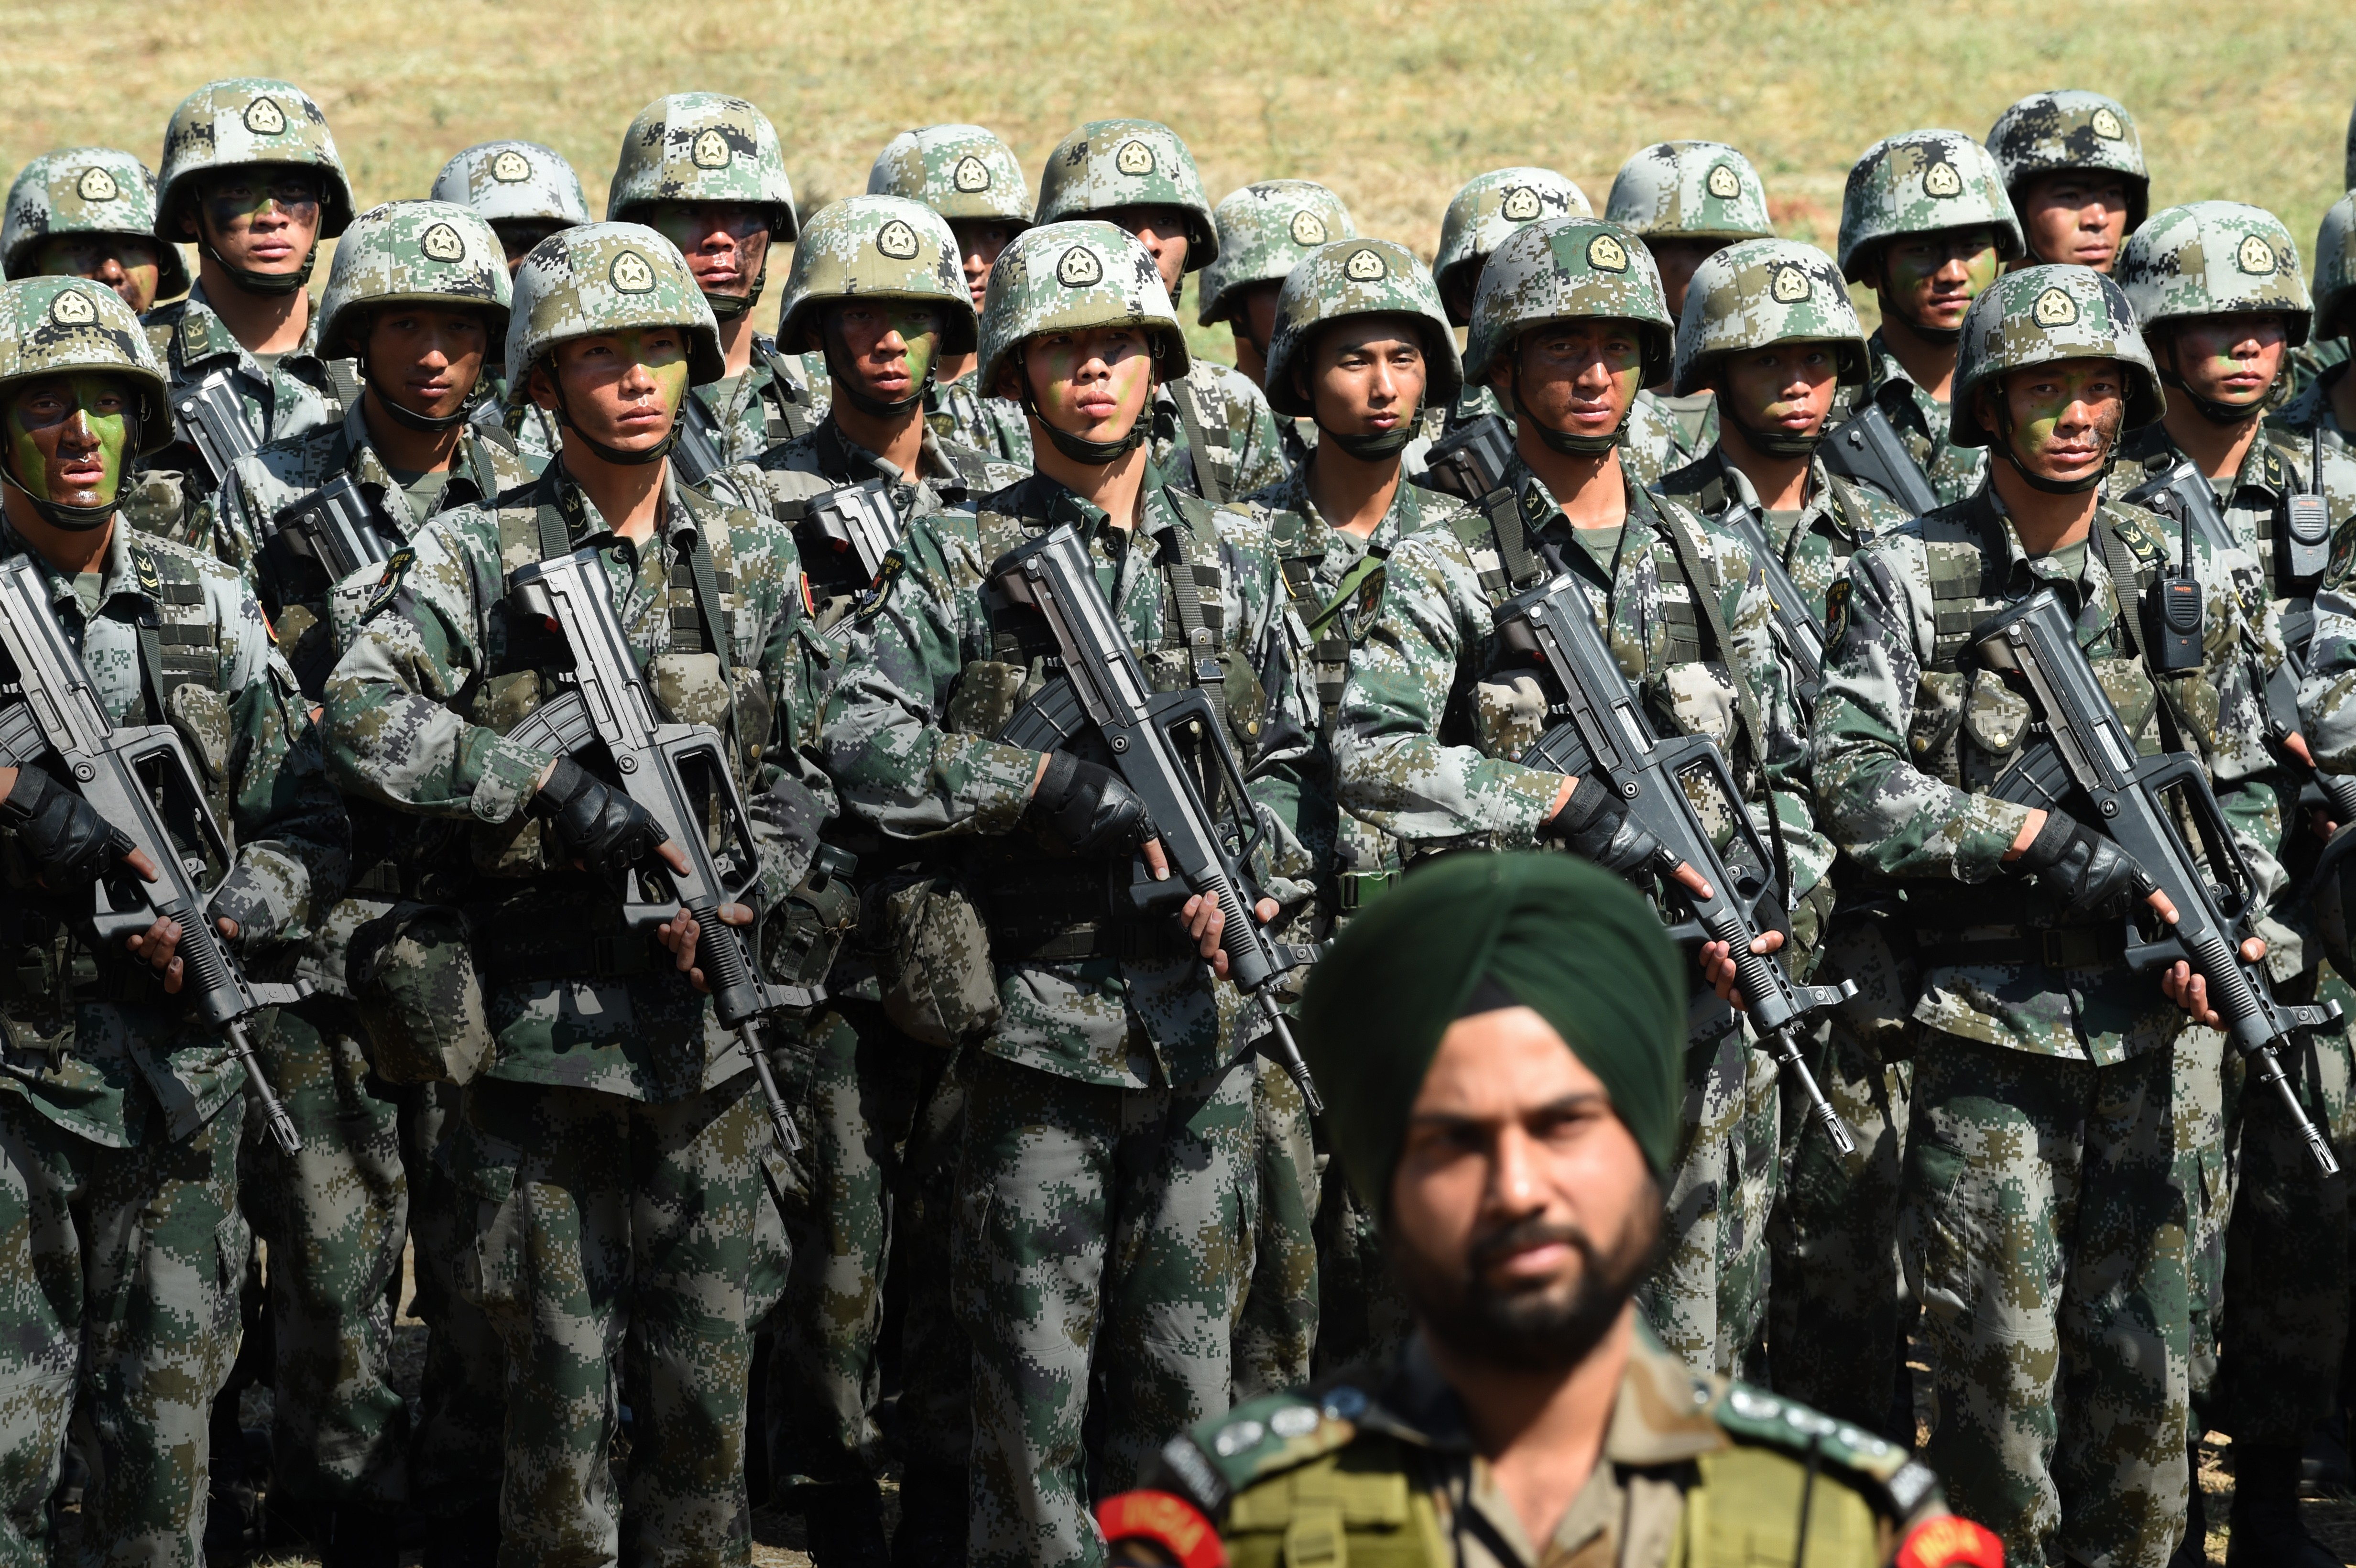 Chinese and Indian troops are reported to have clashed in the eastern section of Jammu and Kashmir earlier this month. Photo: AFP